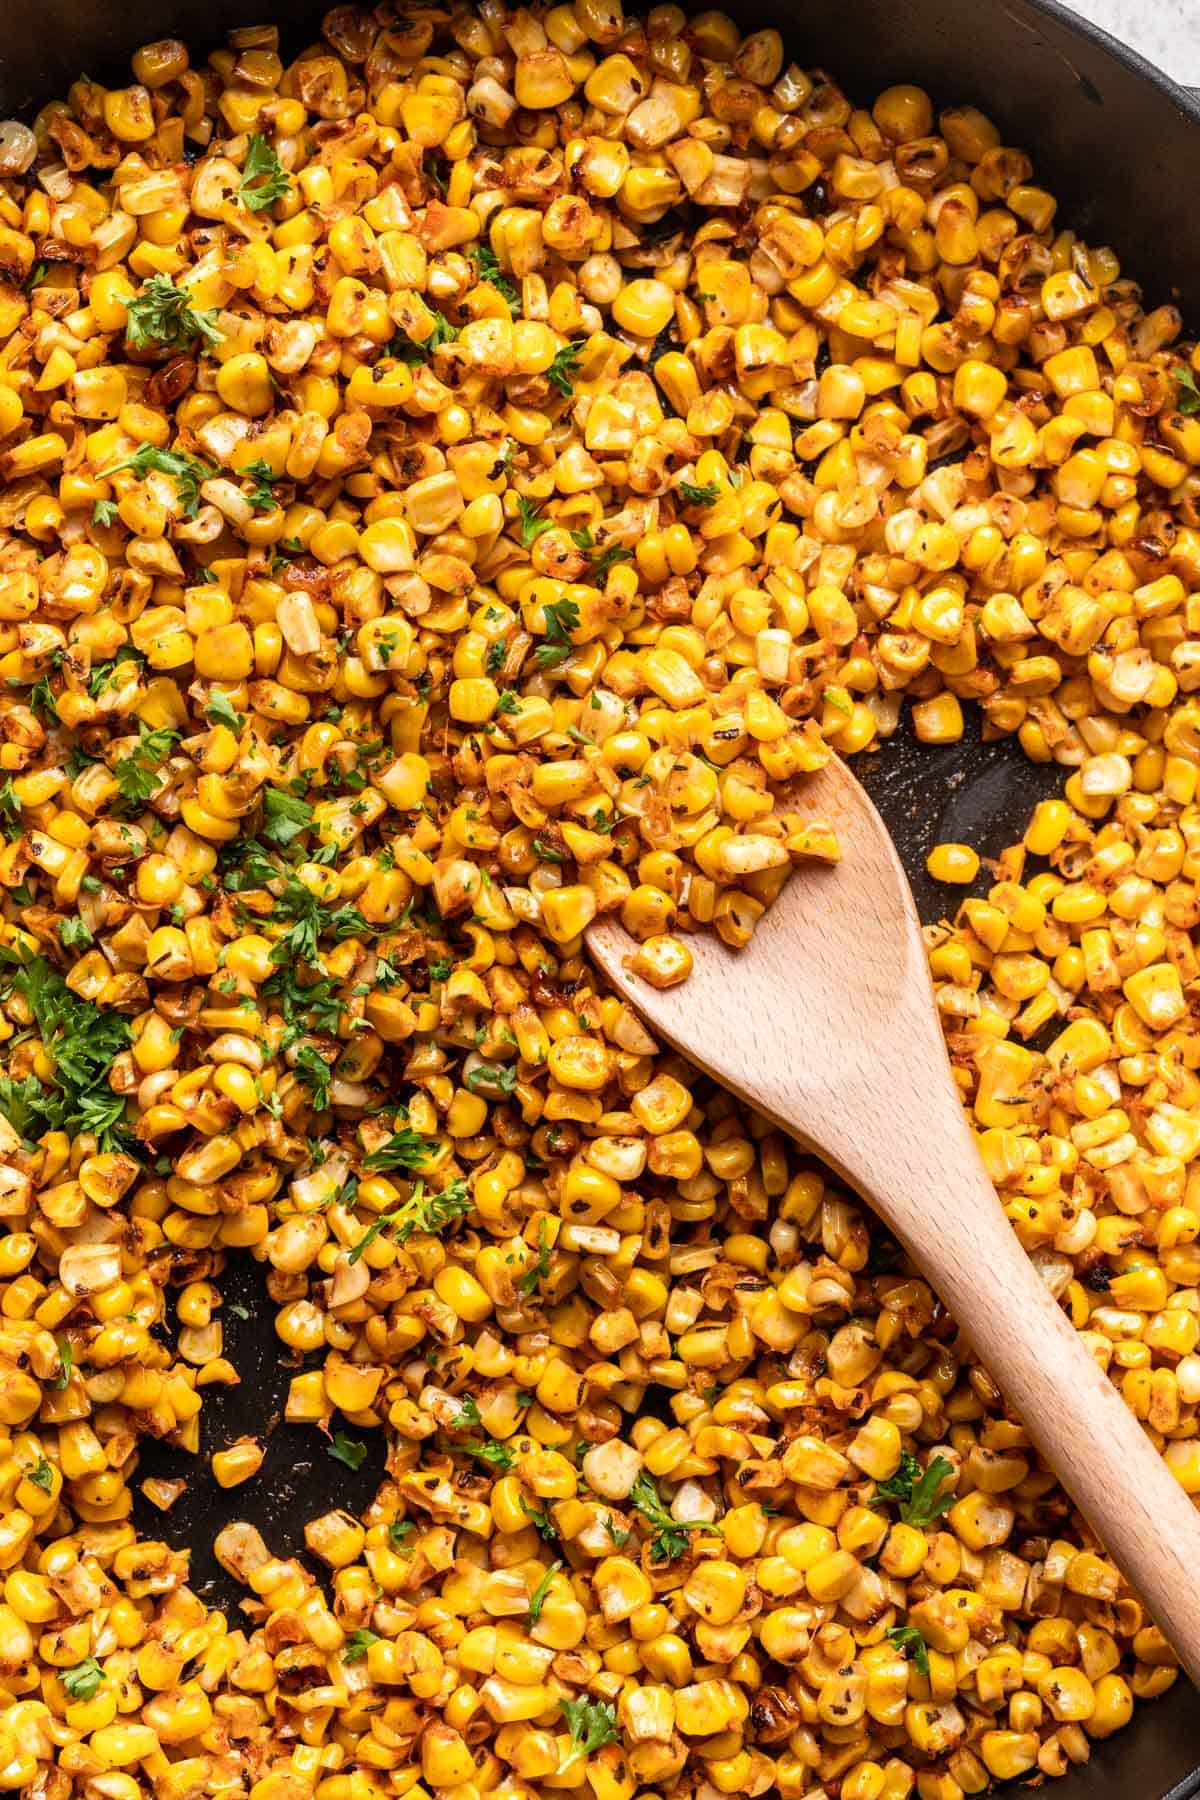 Blackened corn scooped with a wooden spoon.